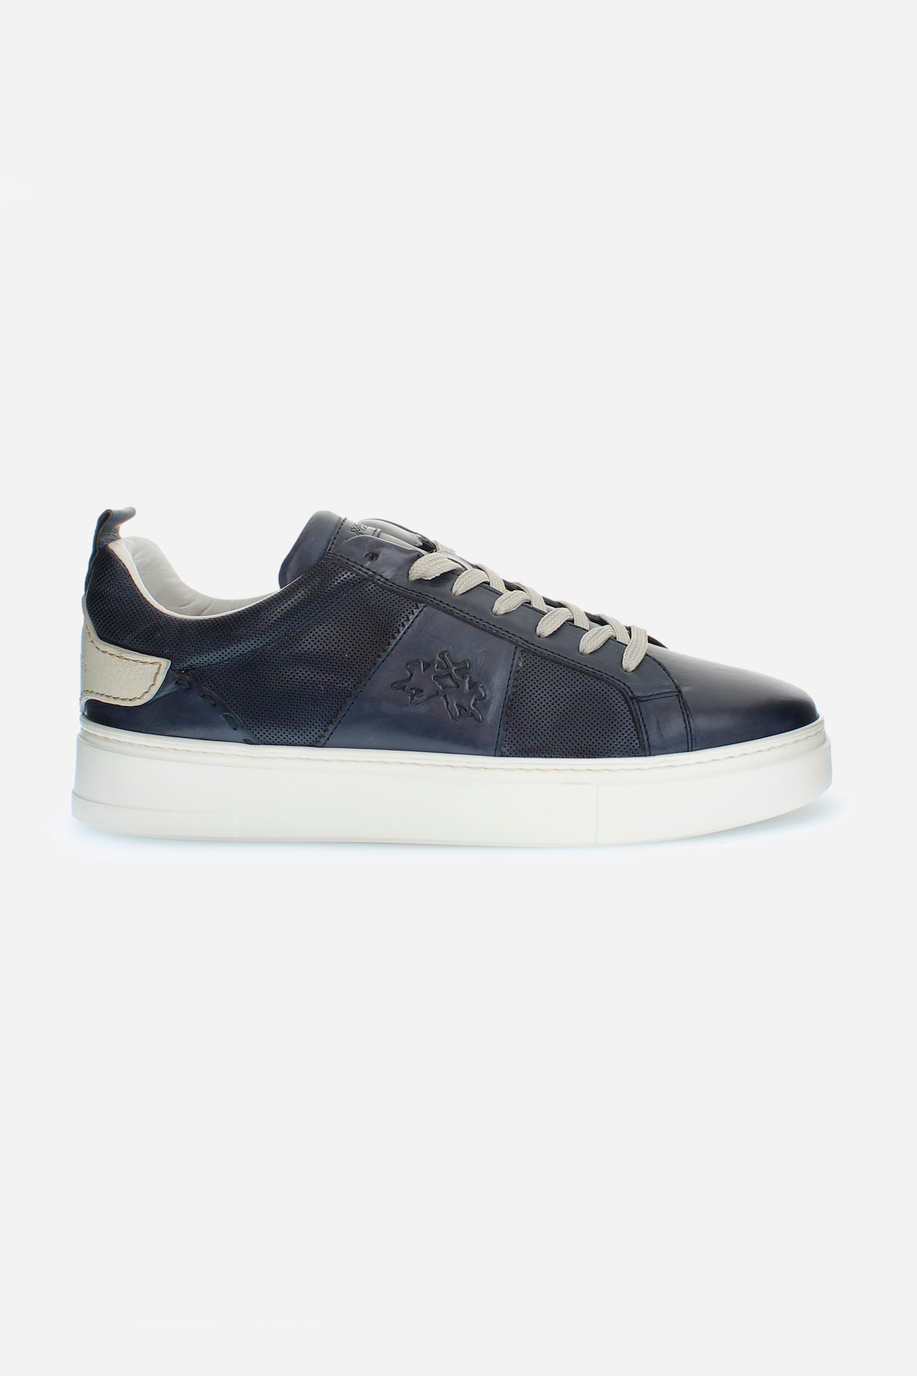 Men's leather trainers with contrasting inserts - Shoes and Accessories | La Martina - Official Online Shop